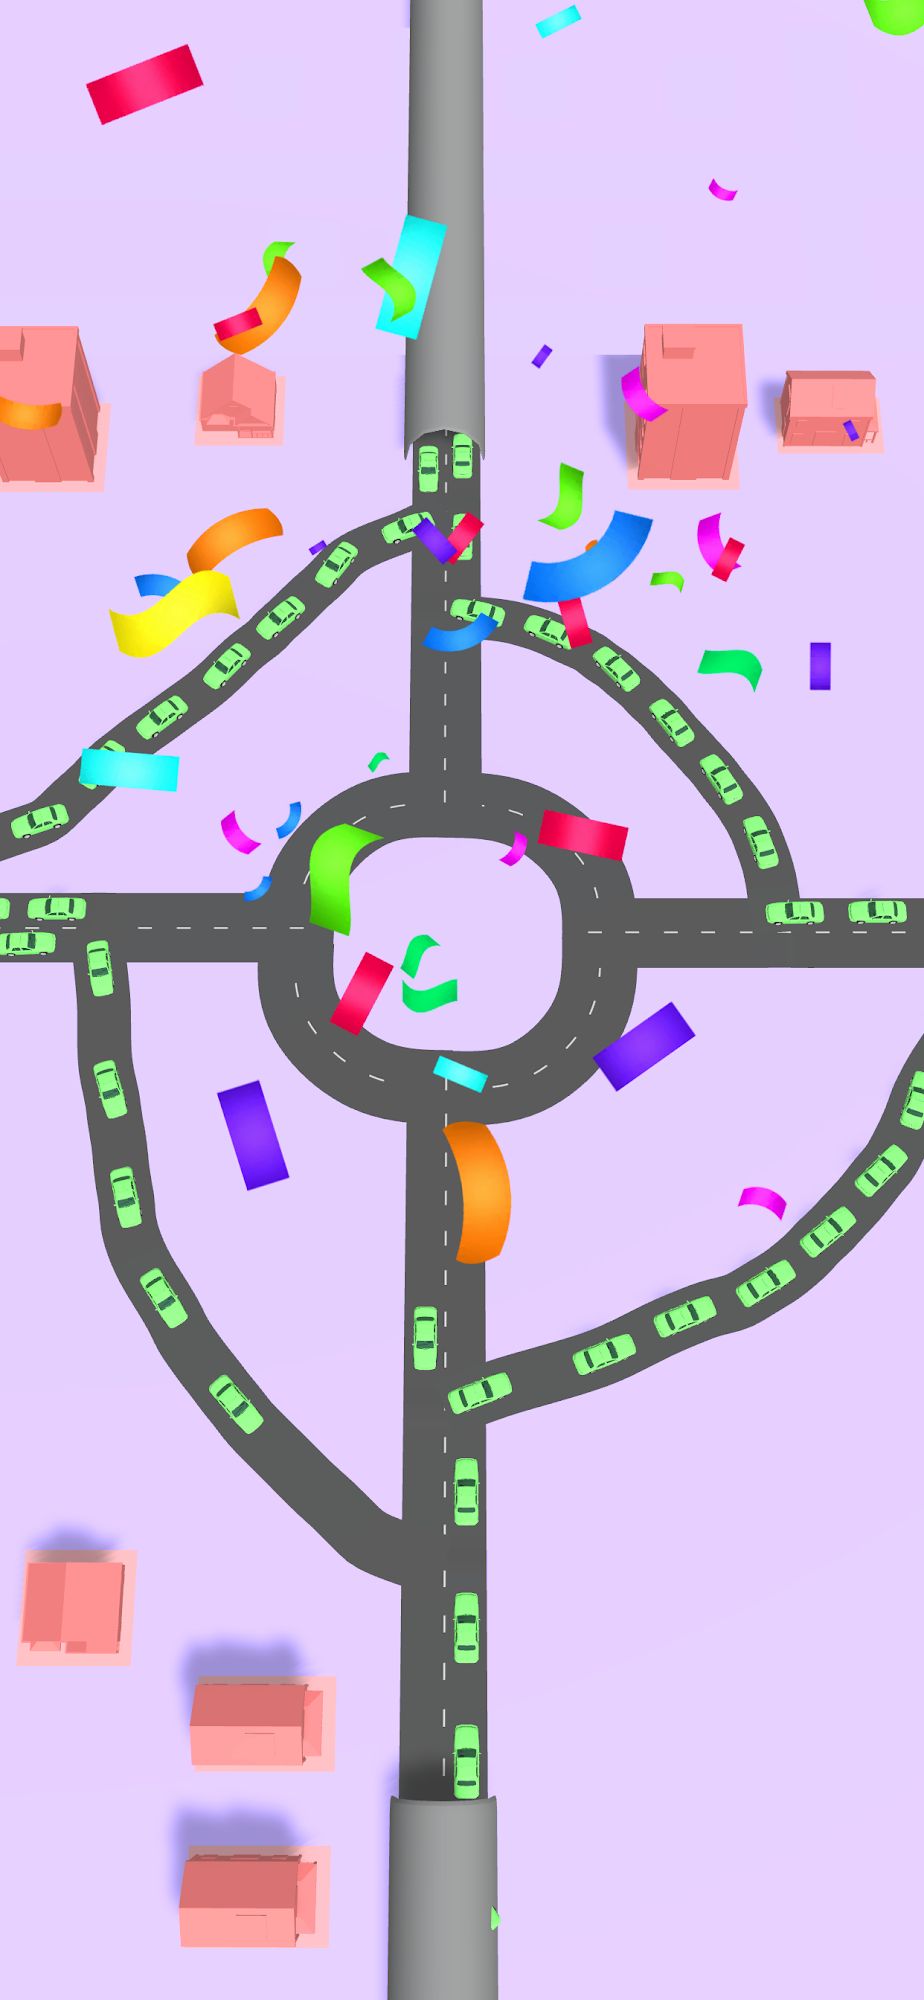 Gameplay of the Traffic Expert for Android phone or tablet.